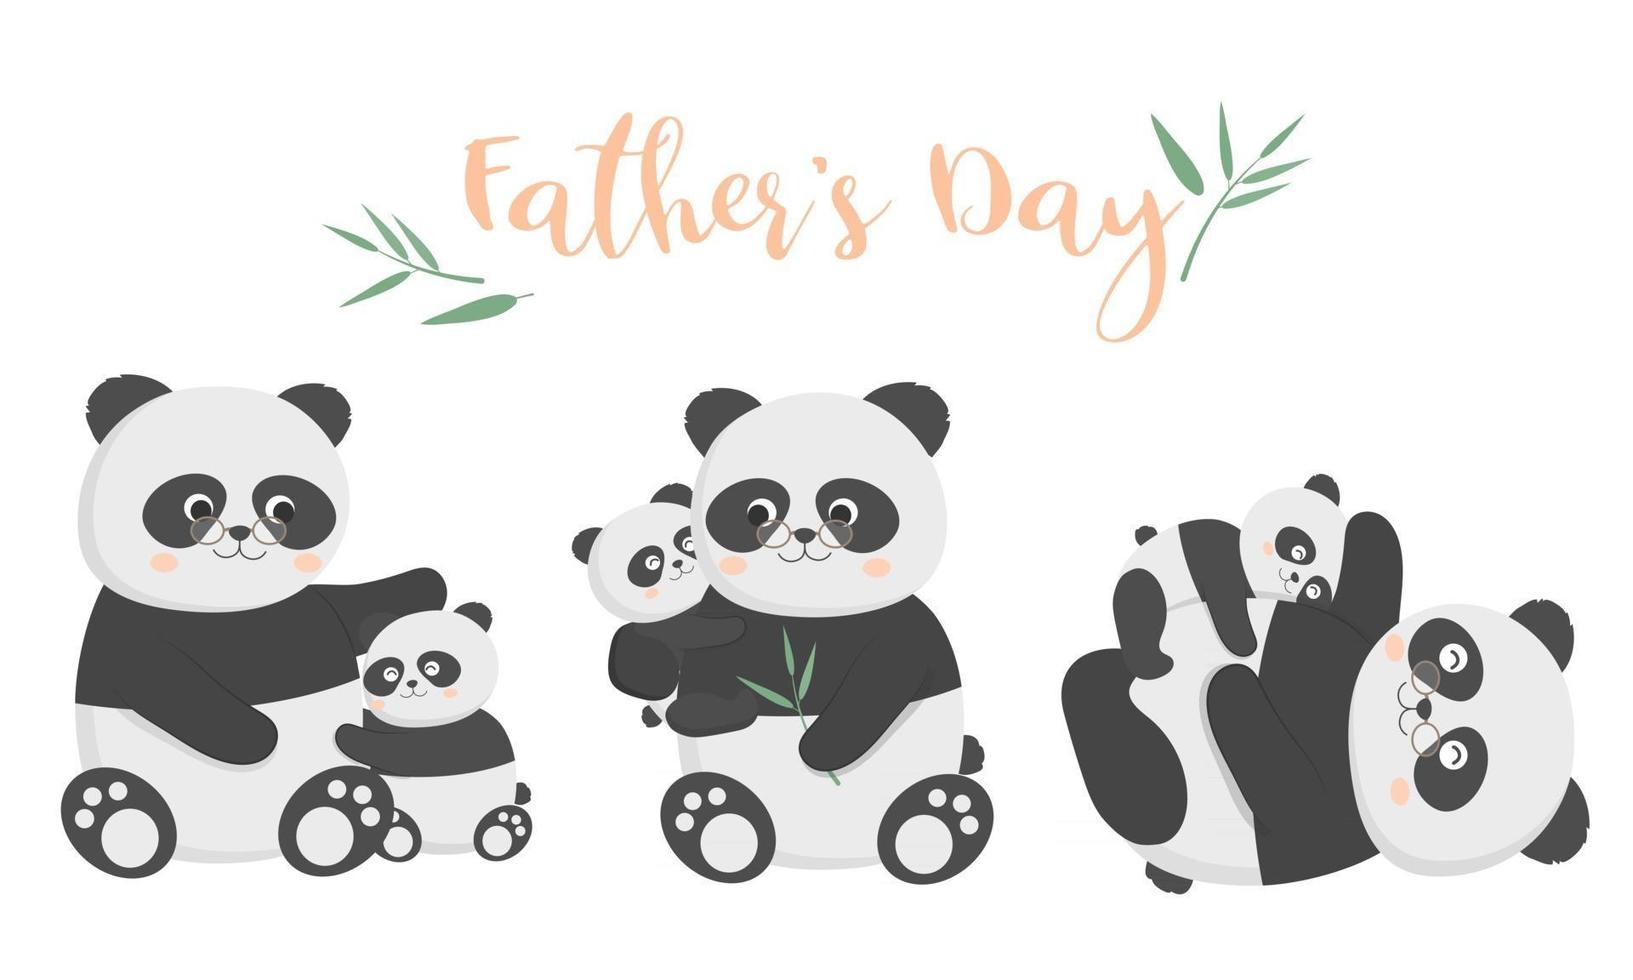 Panda dad is happy with his baby on father's day They hugged and played happily. vector